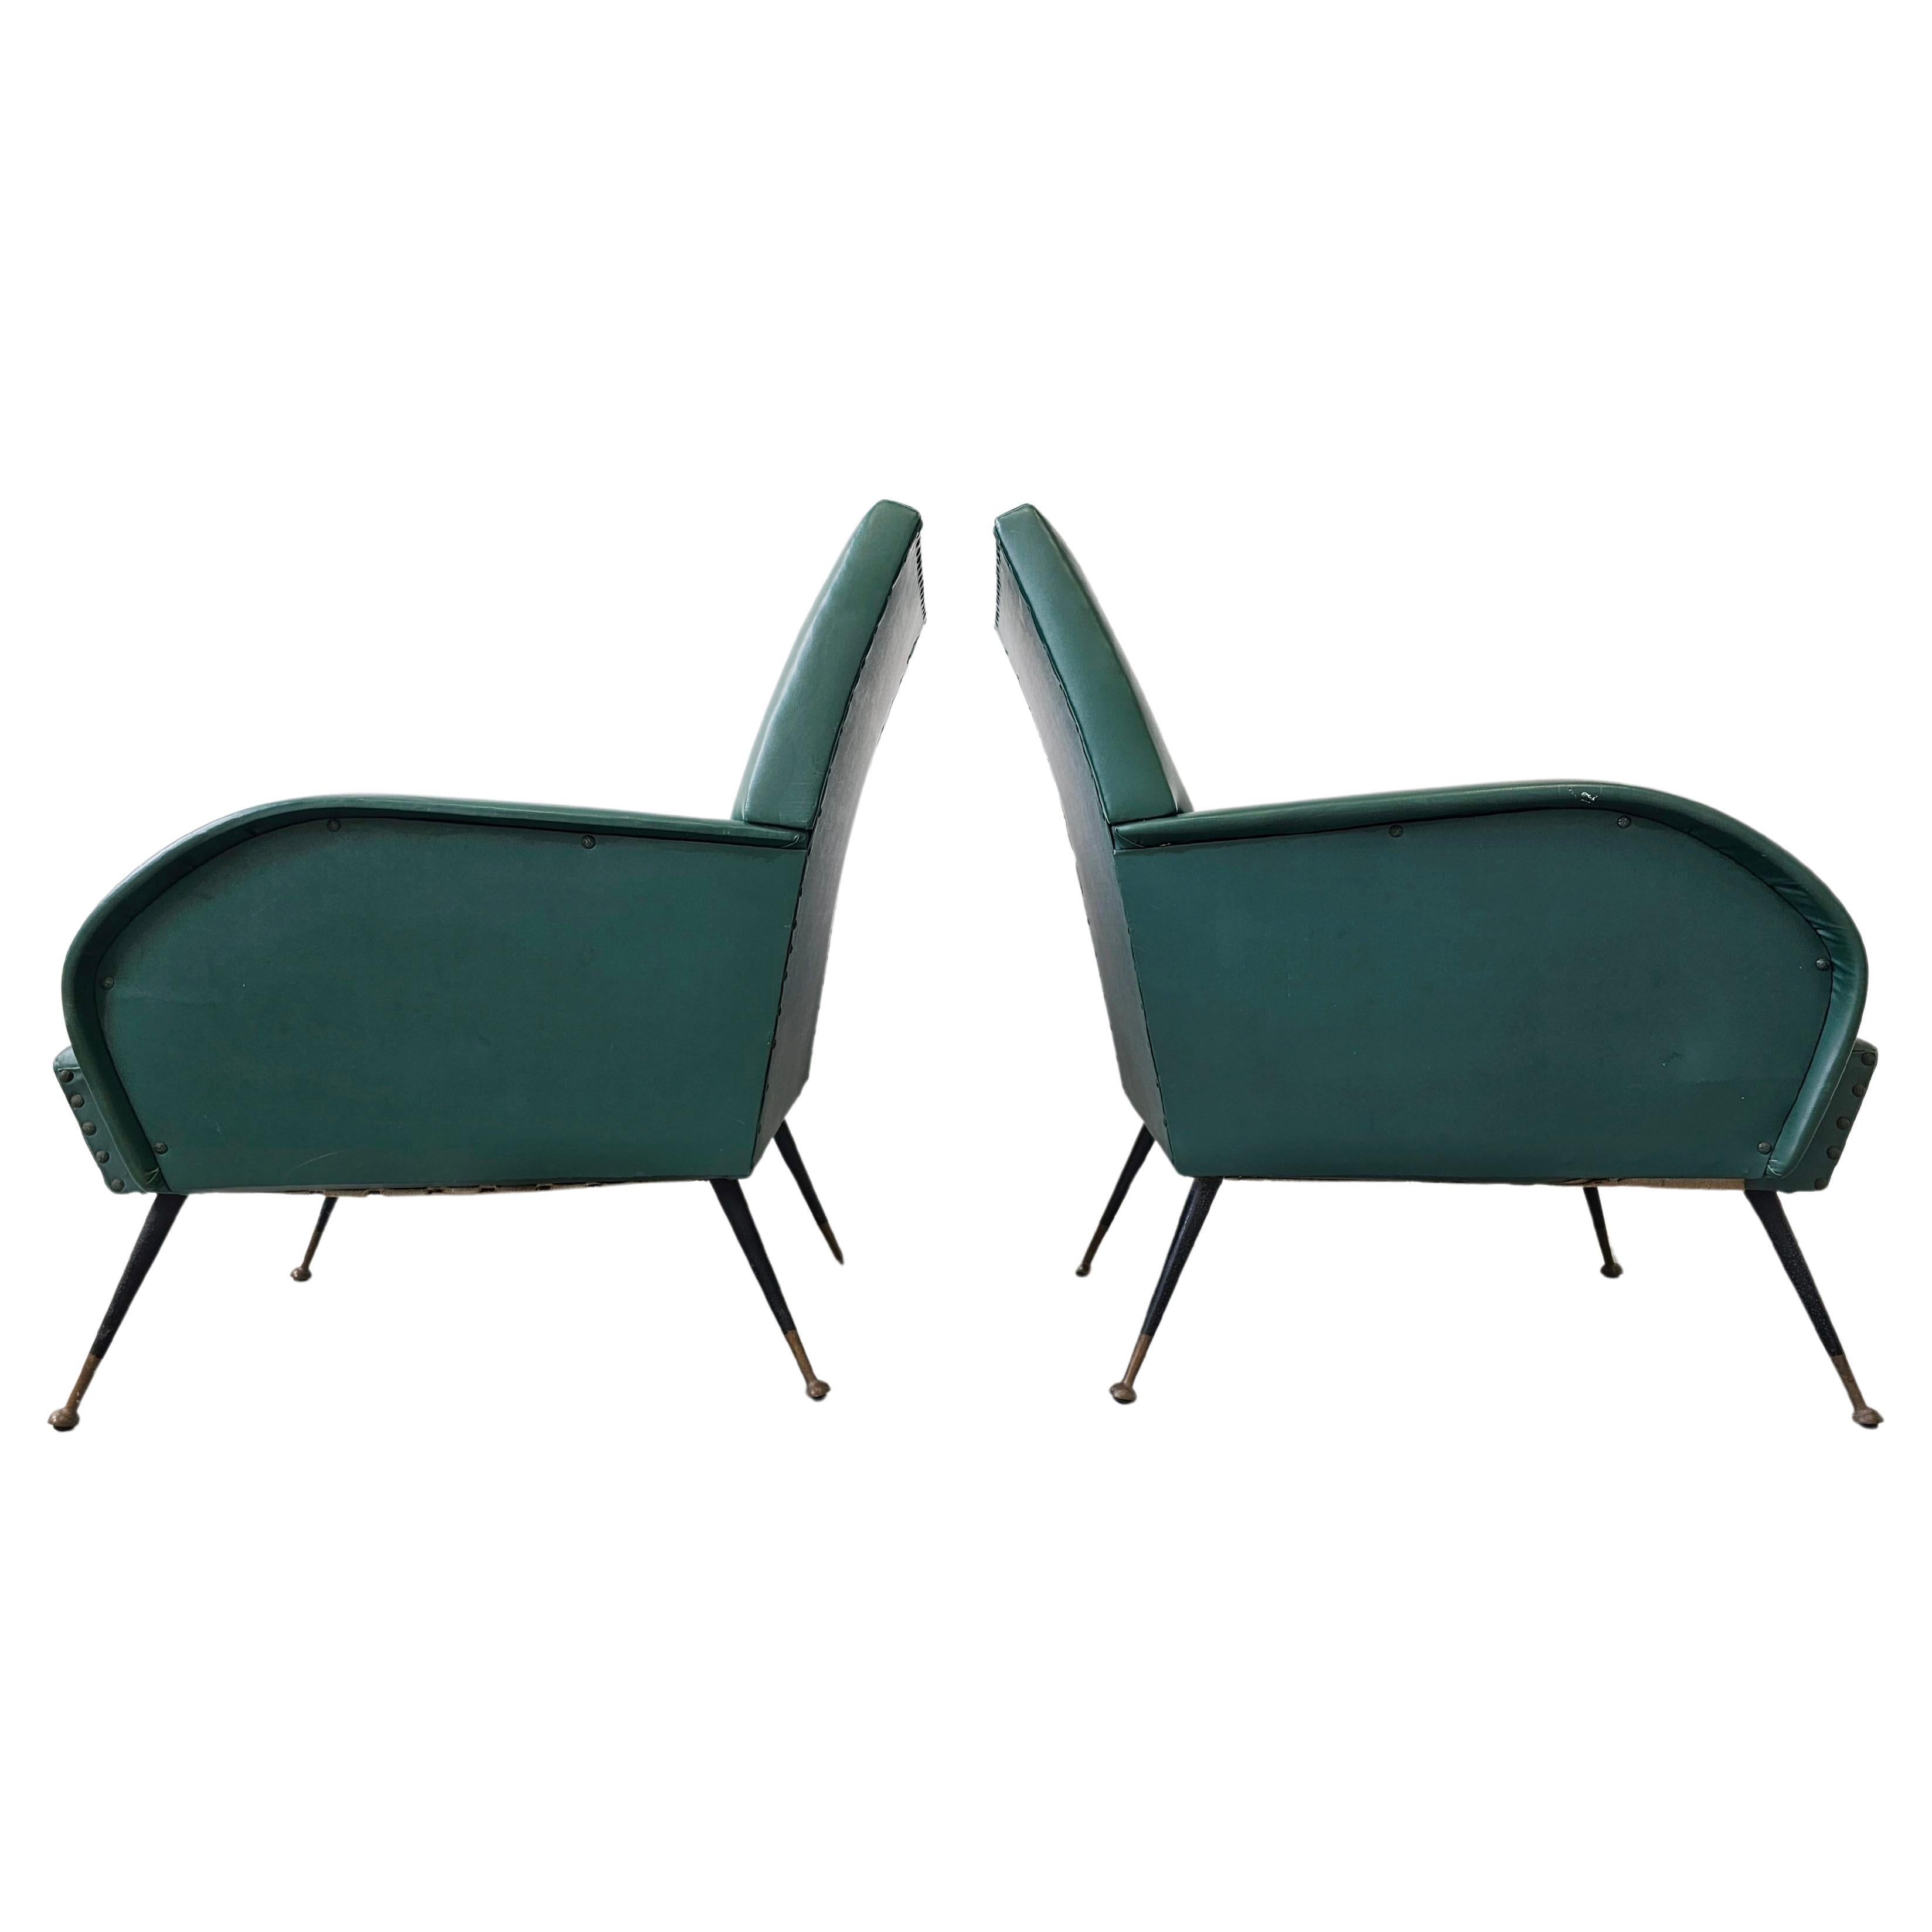 Pair of Mid Century Modern Armchairs in style of Marco Zanuso, Italy 1950s